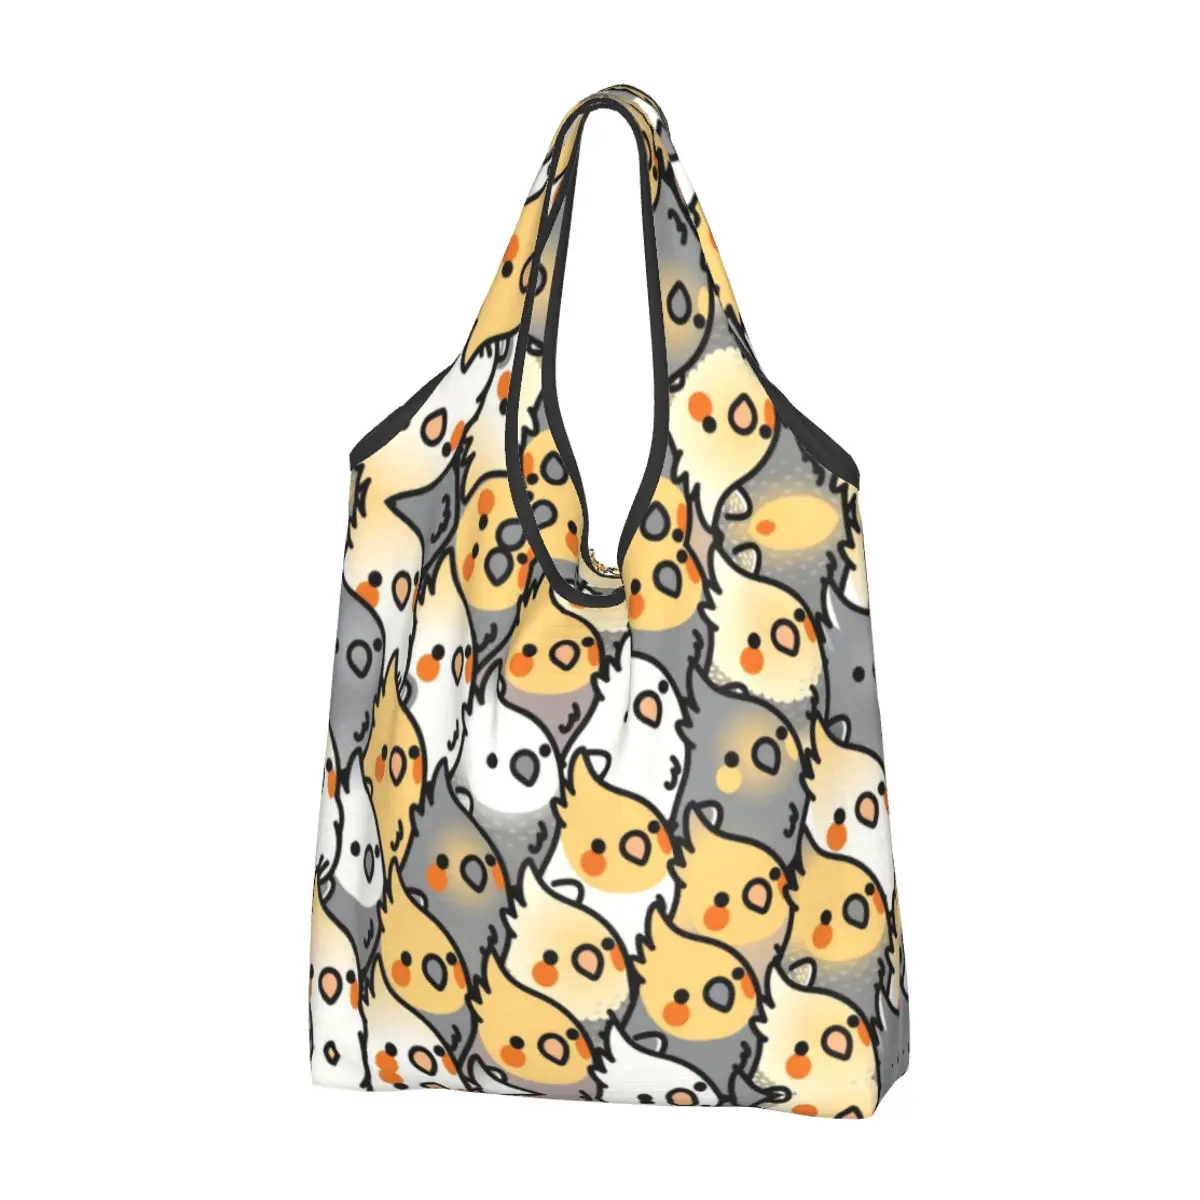 

Chubby Cockatiel Party Grocery Shopping Bags Cute Shopper Shoulder Tote Bag Large Capacity Portable Parrot Bird Handbag